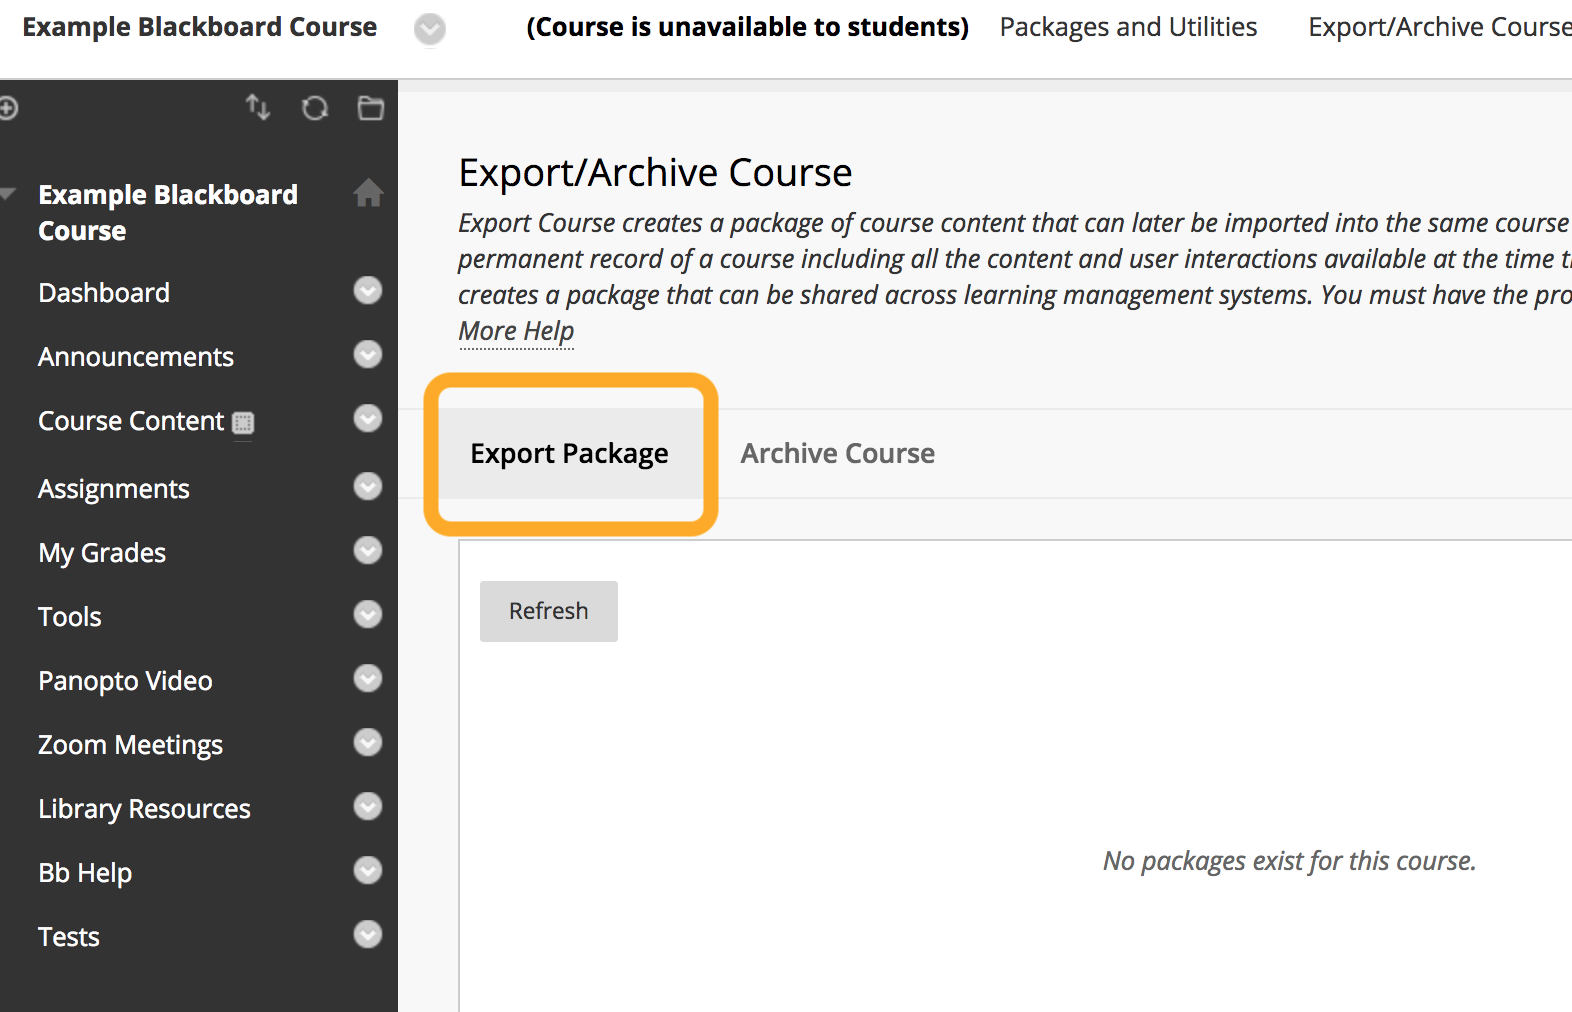 Select Export Package.